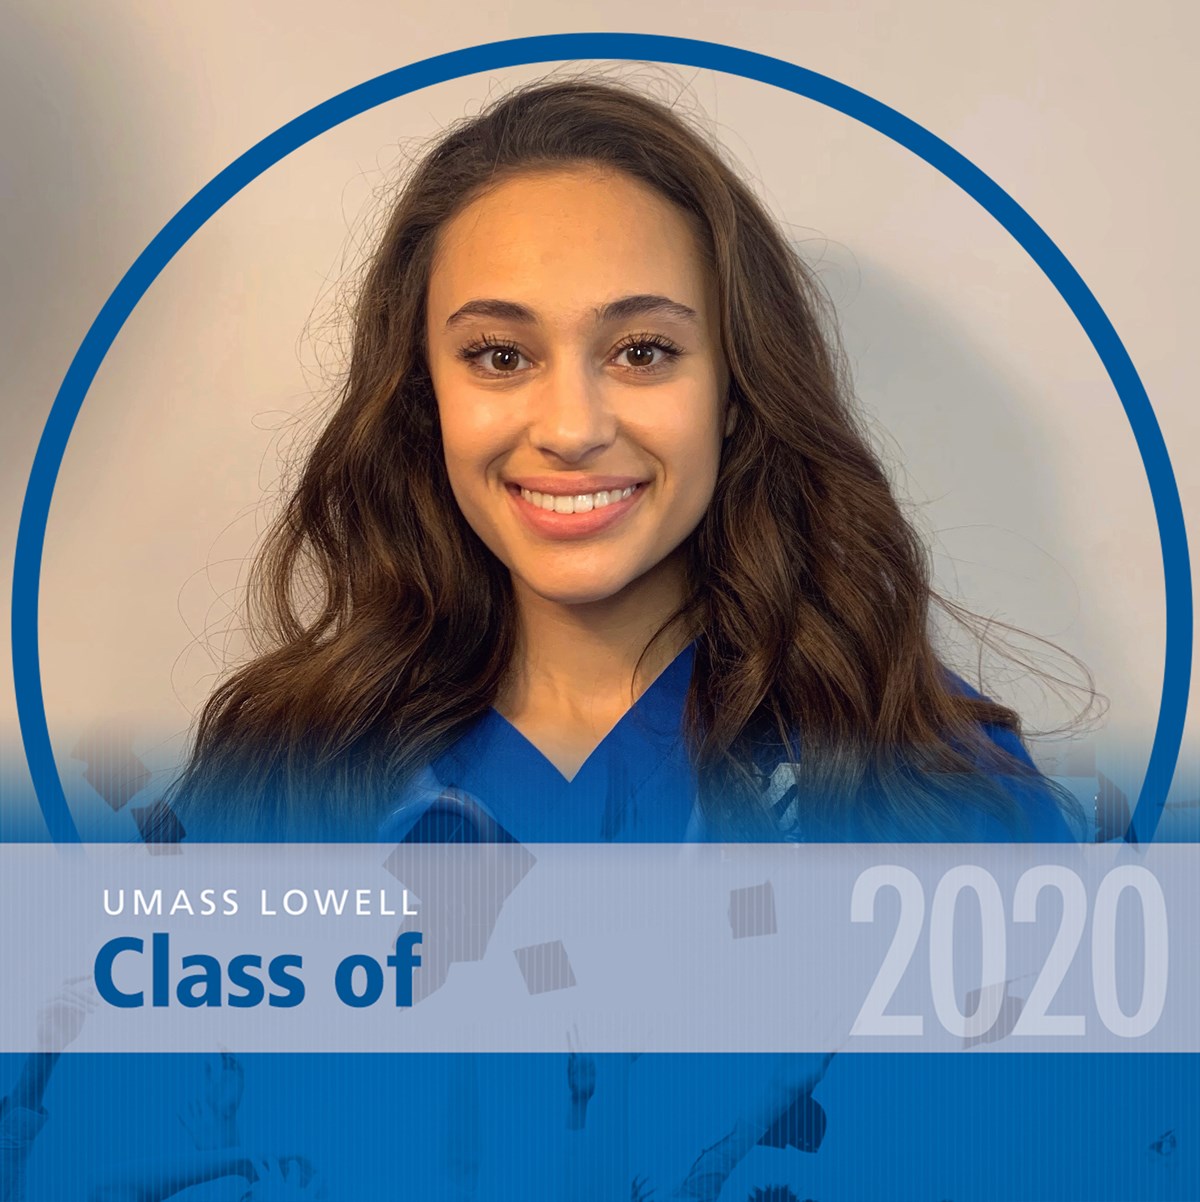 Headshot of Sophia Samih with a blue decorative frame around it that reads "UMass Lowell Class of 2020."